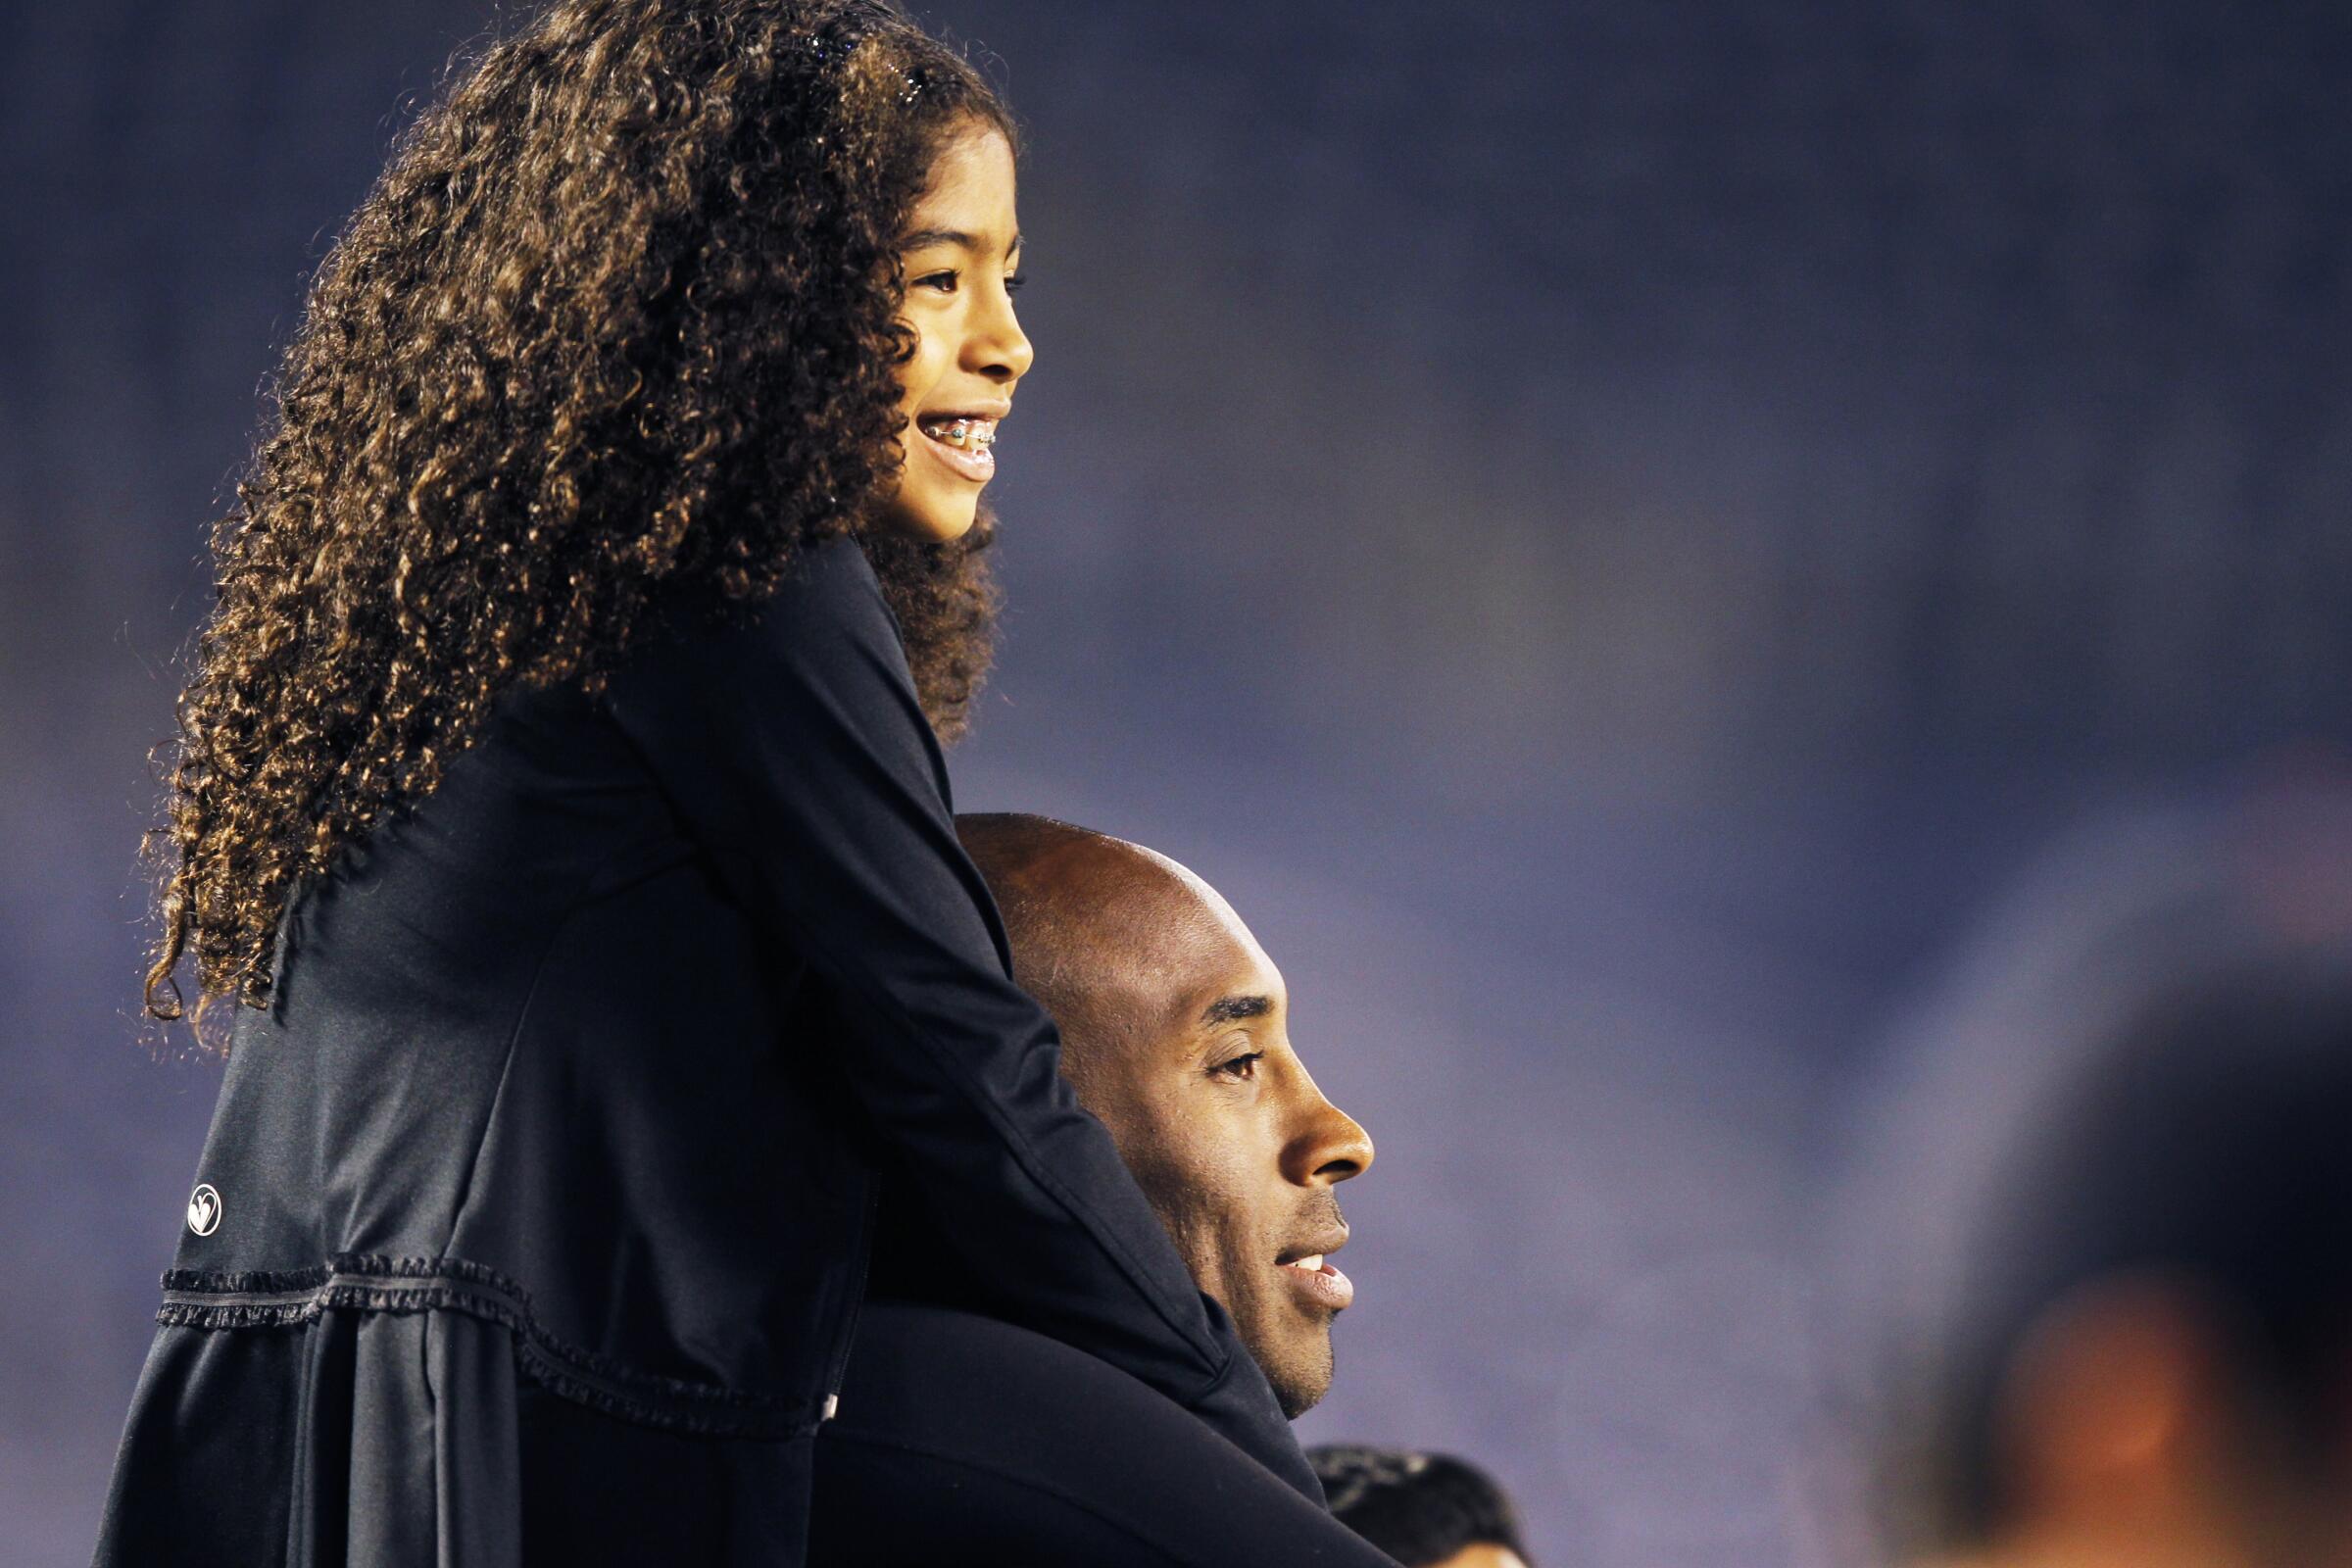 Kobe Bryant and his daughter Gianna take in the U.S. women's national soccer team game against China in San Diego in 2014.